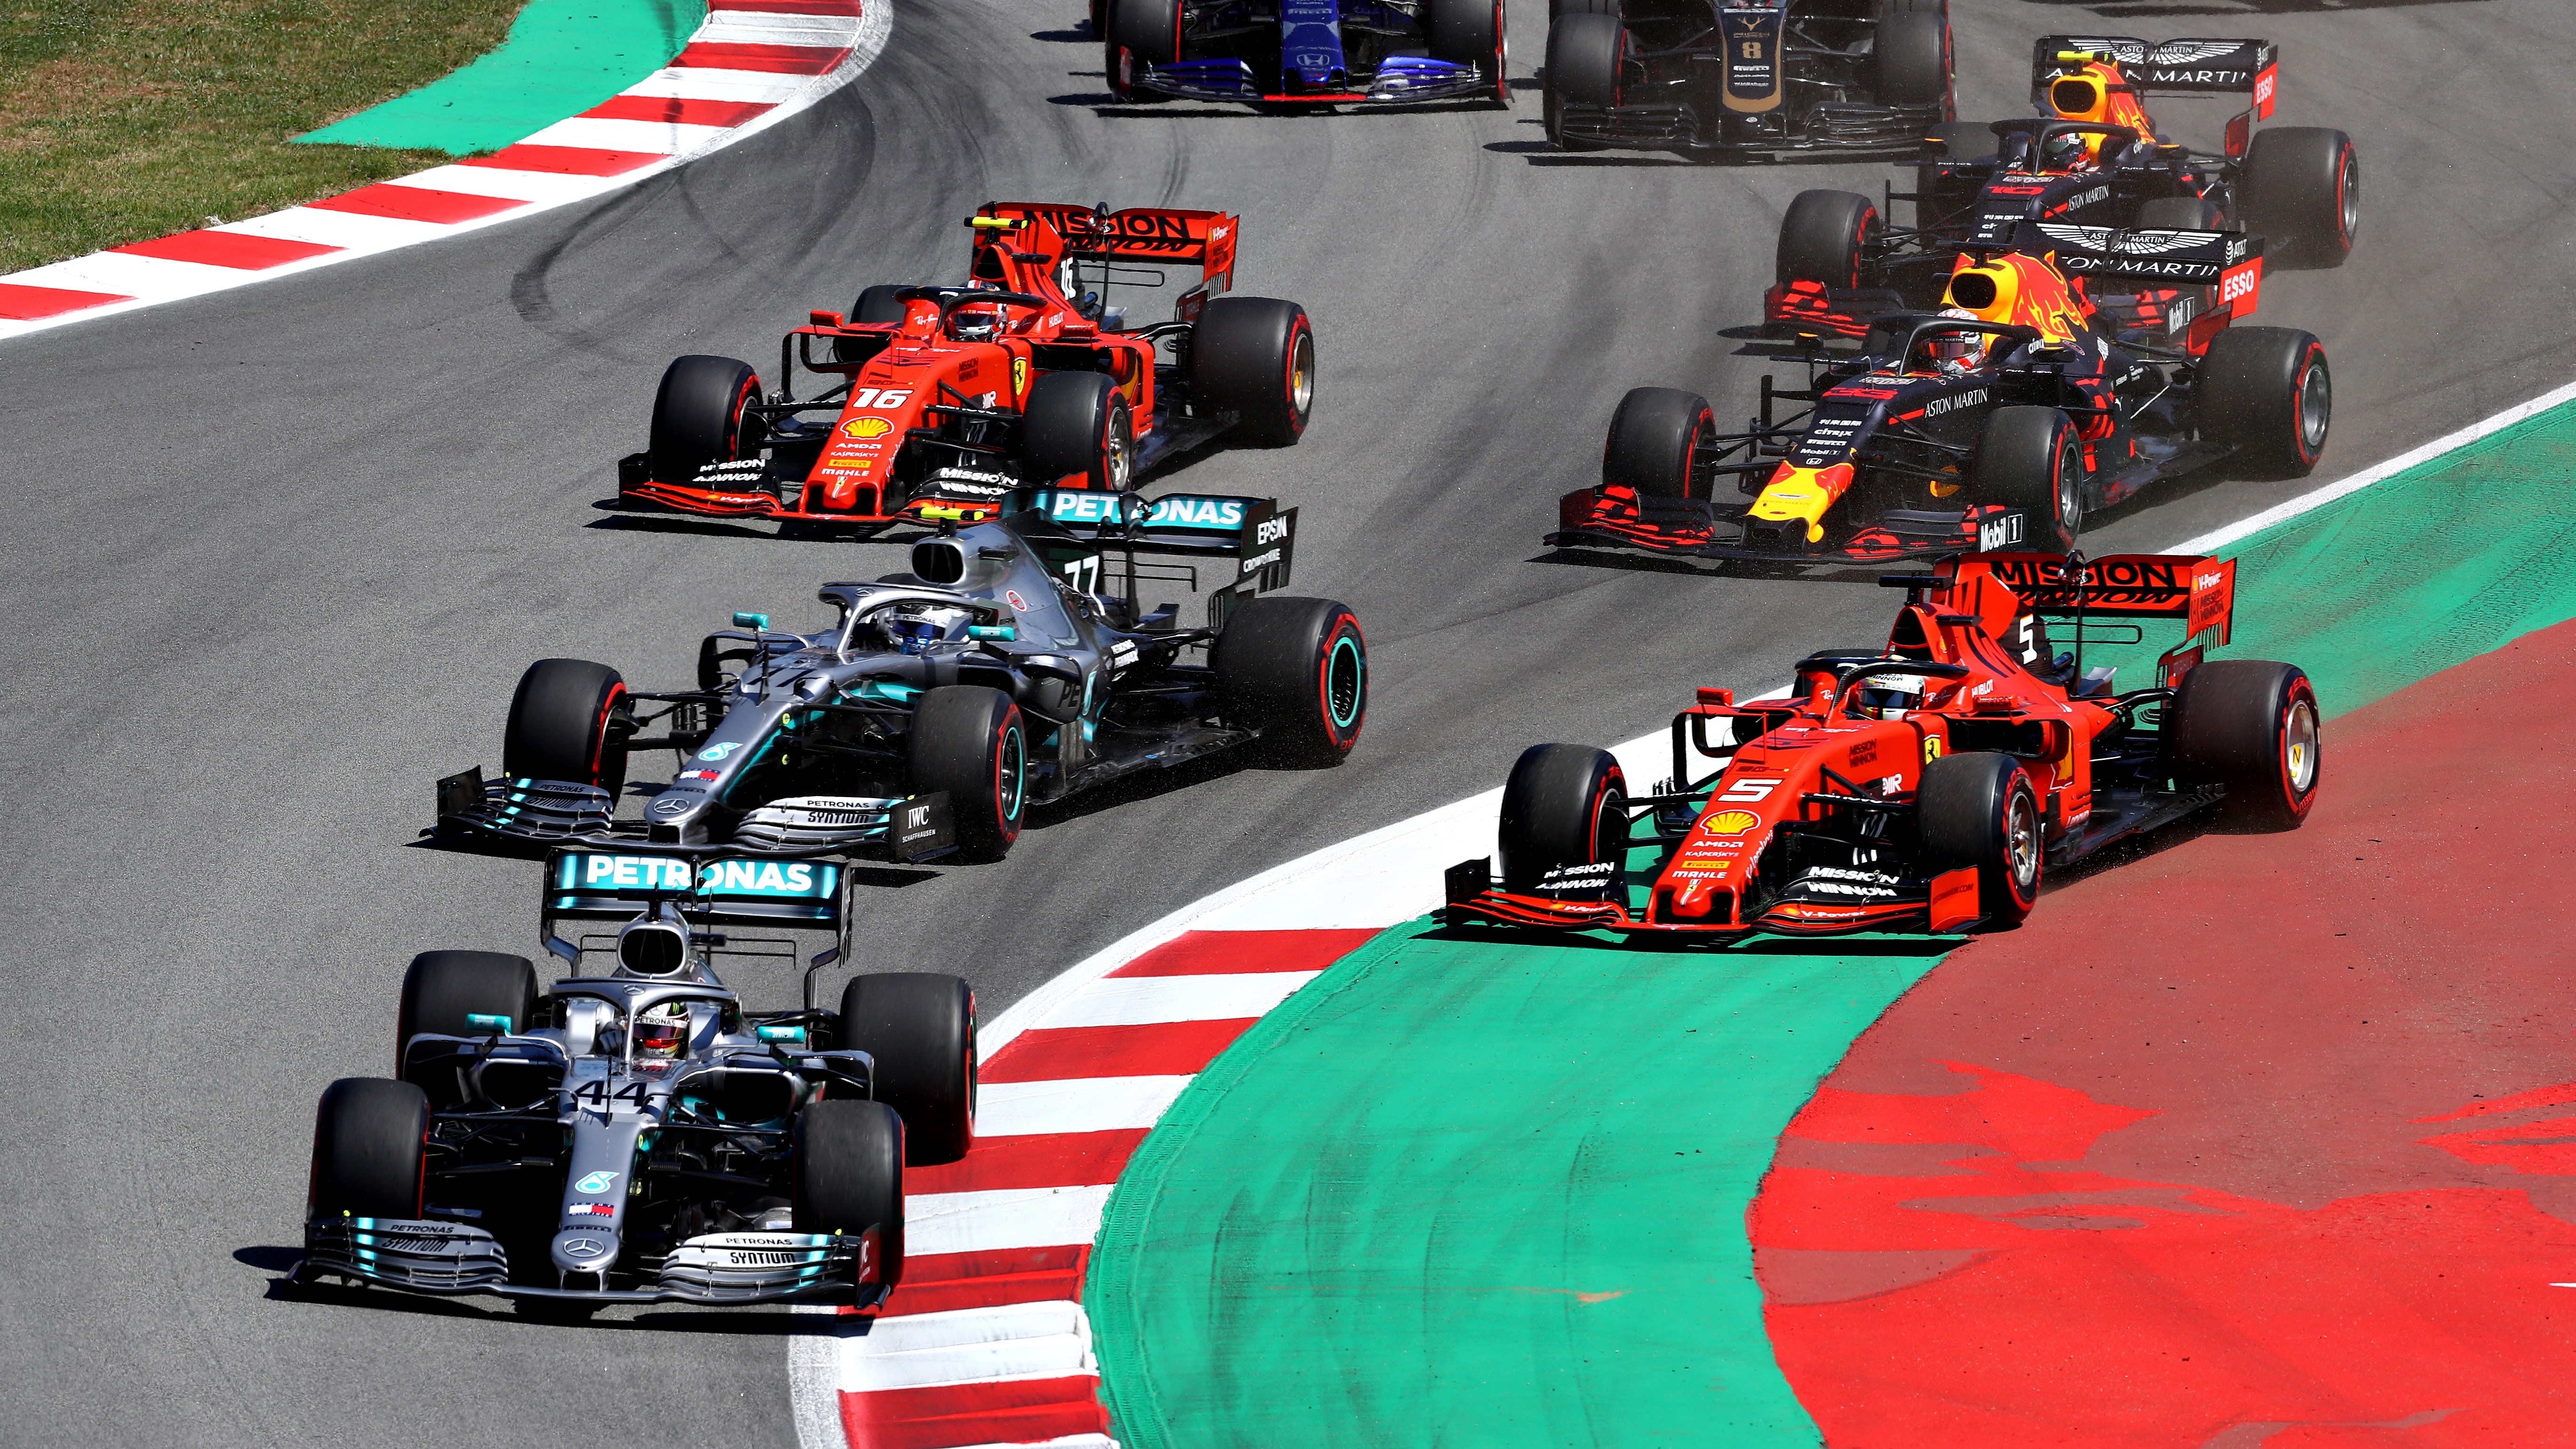 F1 TV explained: what it is, what it includes, cost, how to get it